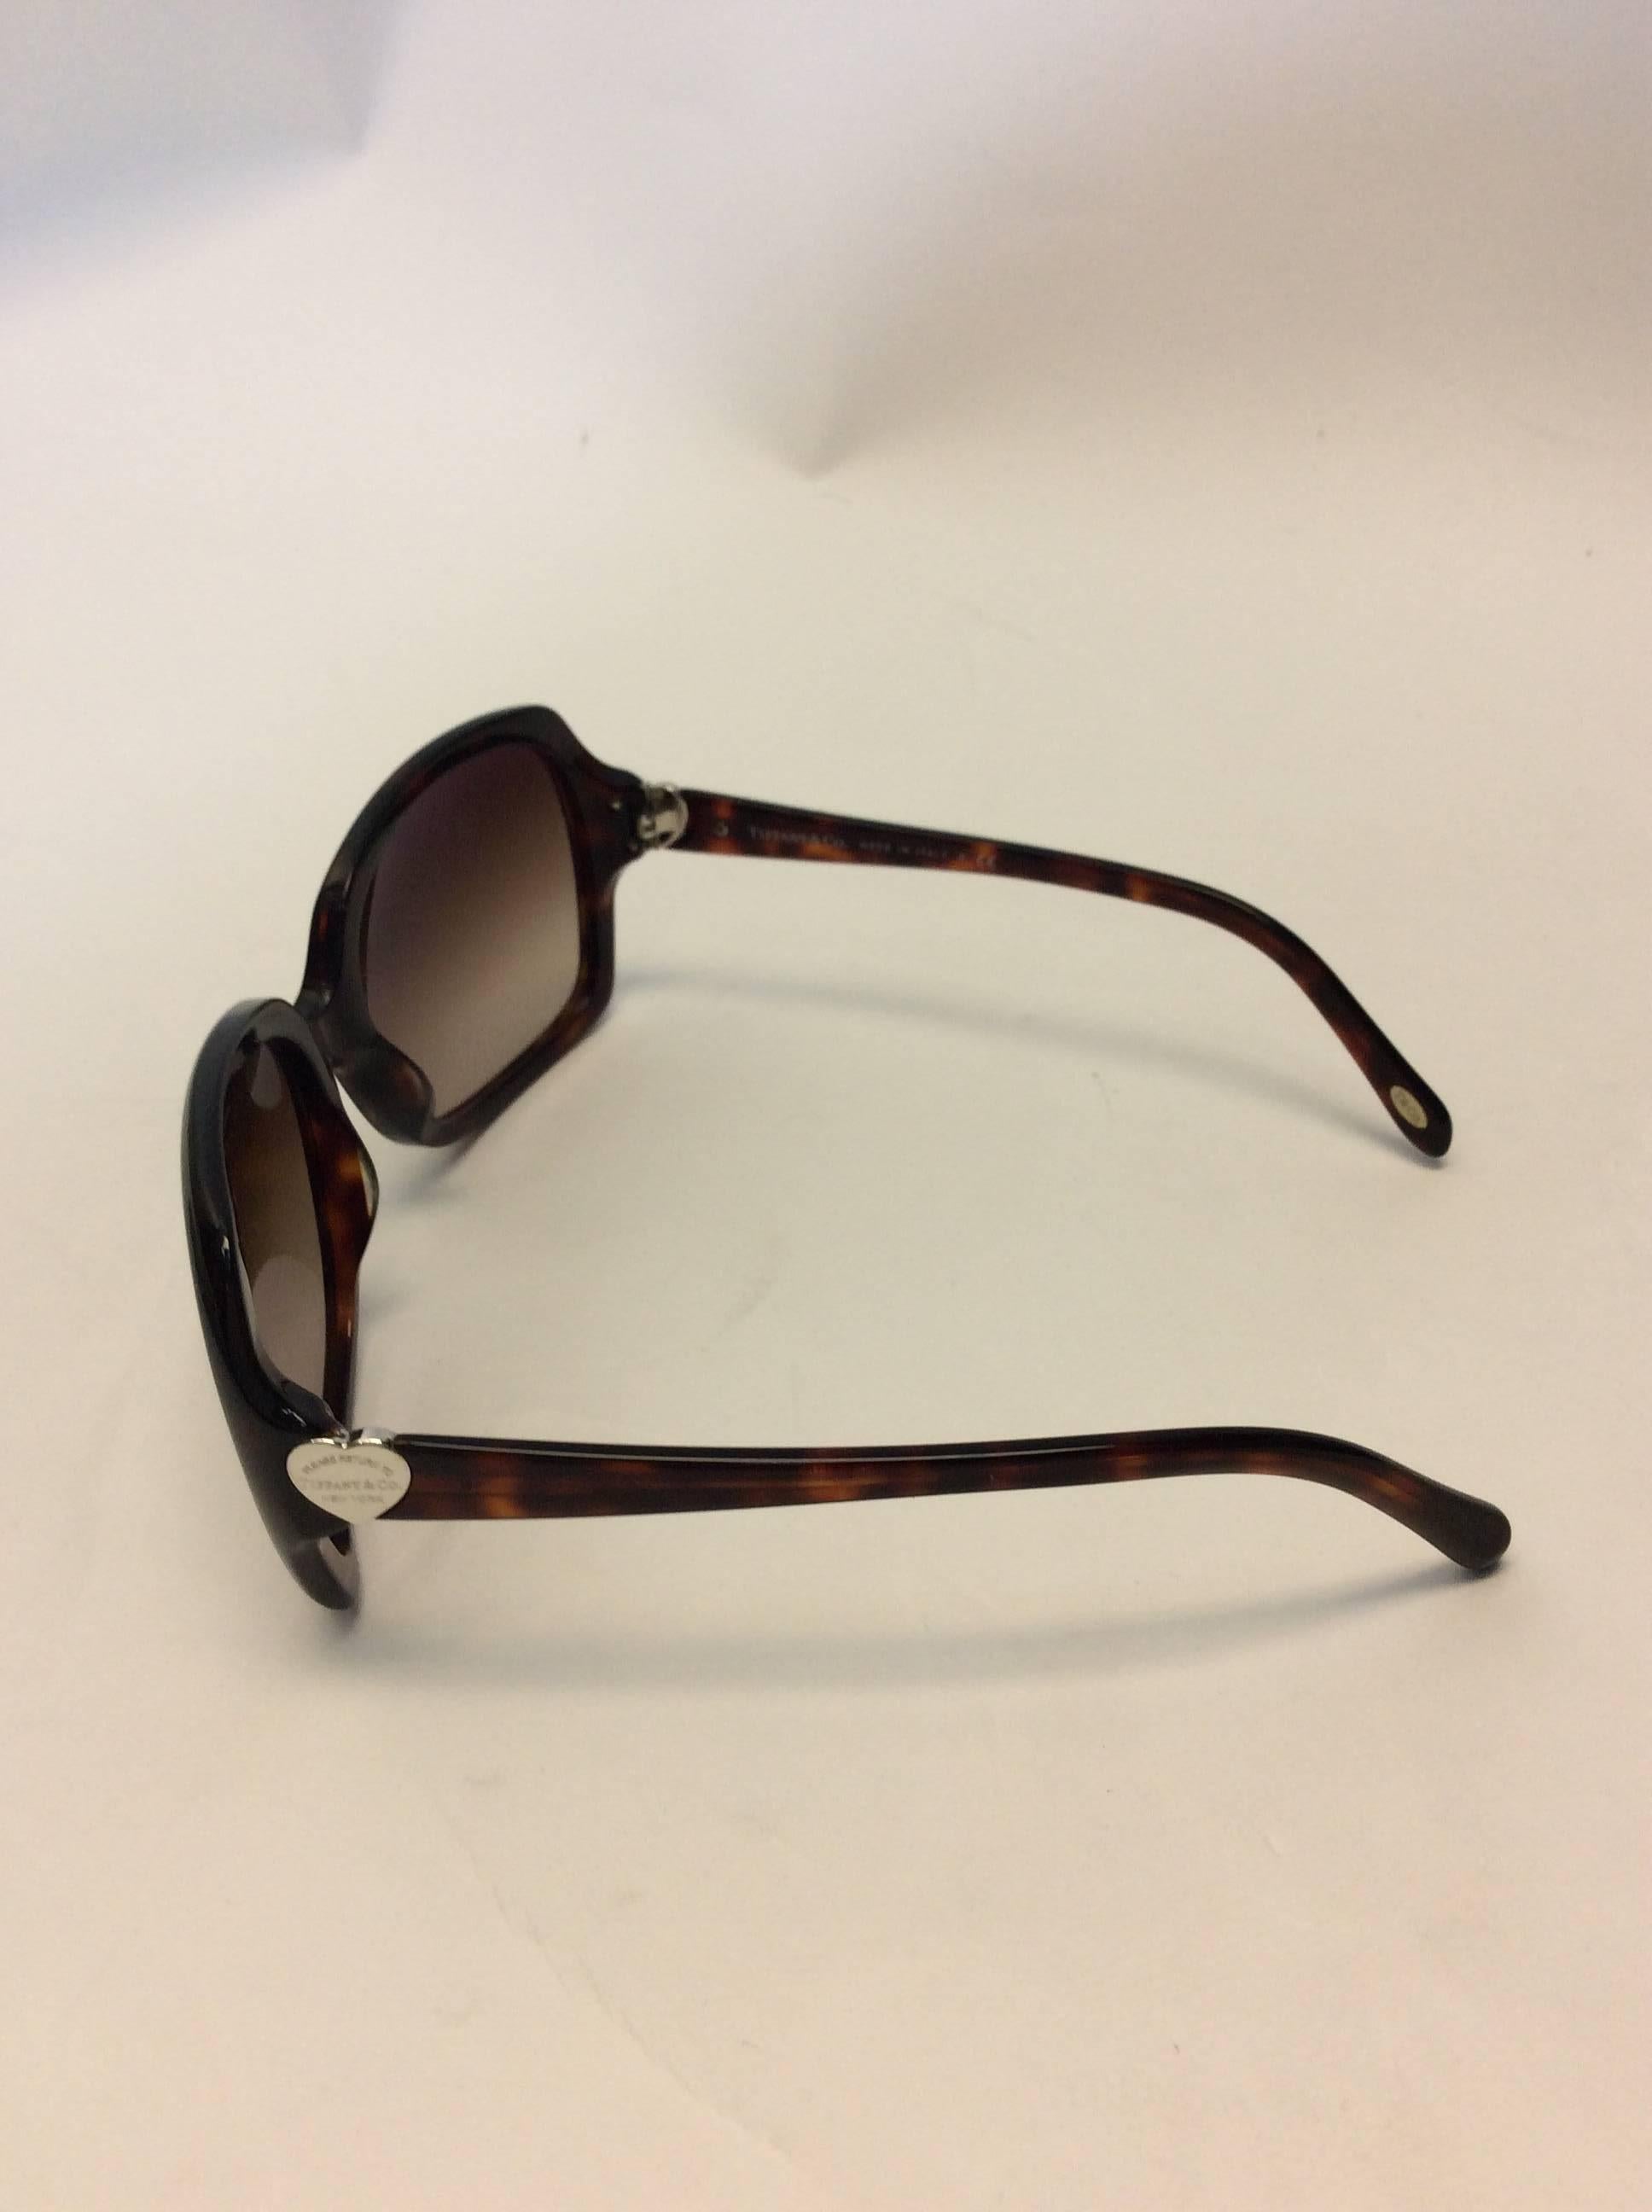 Tiffany & Co Brown Tortoise Sunglasses In Excellent Condition For Sale In Narberth, PA